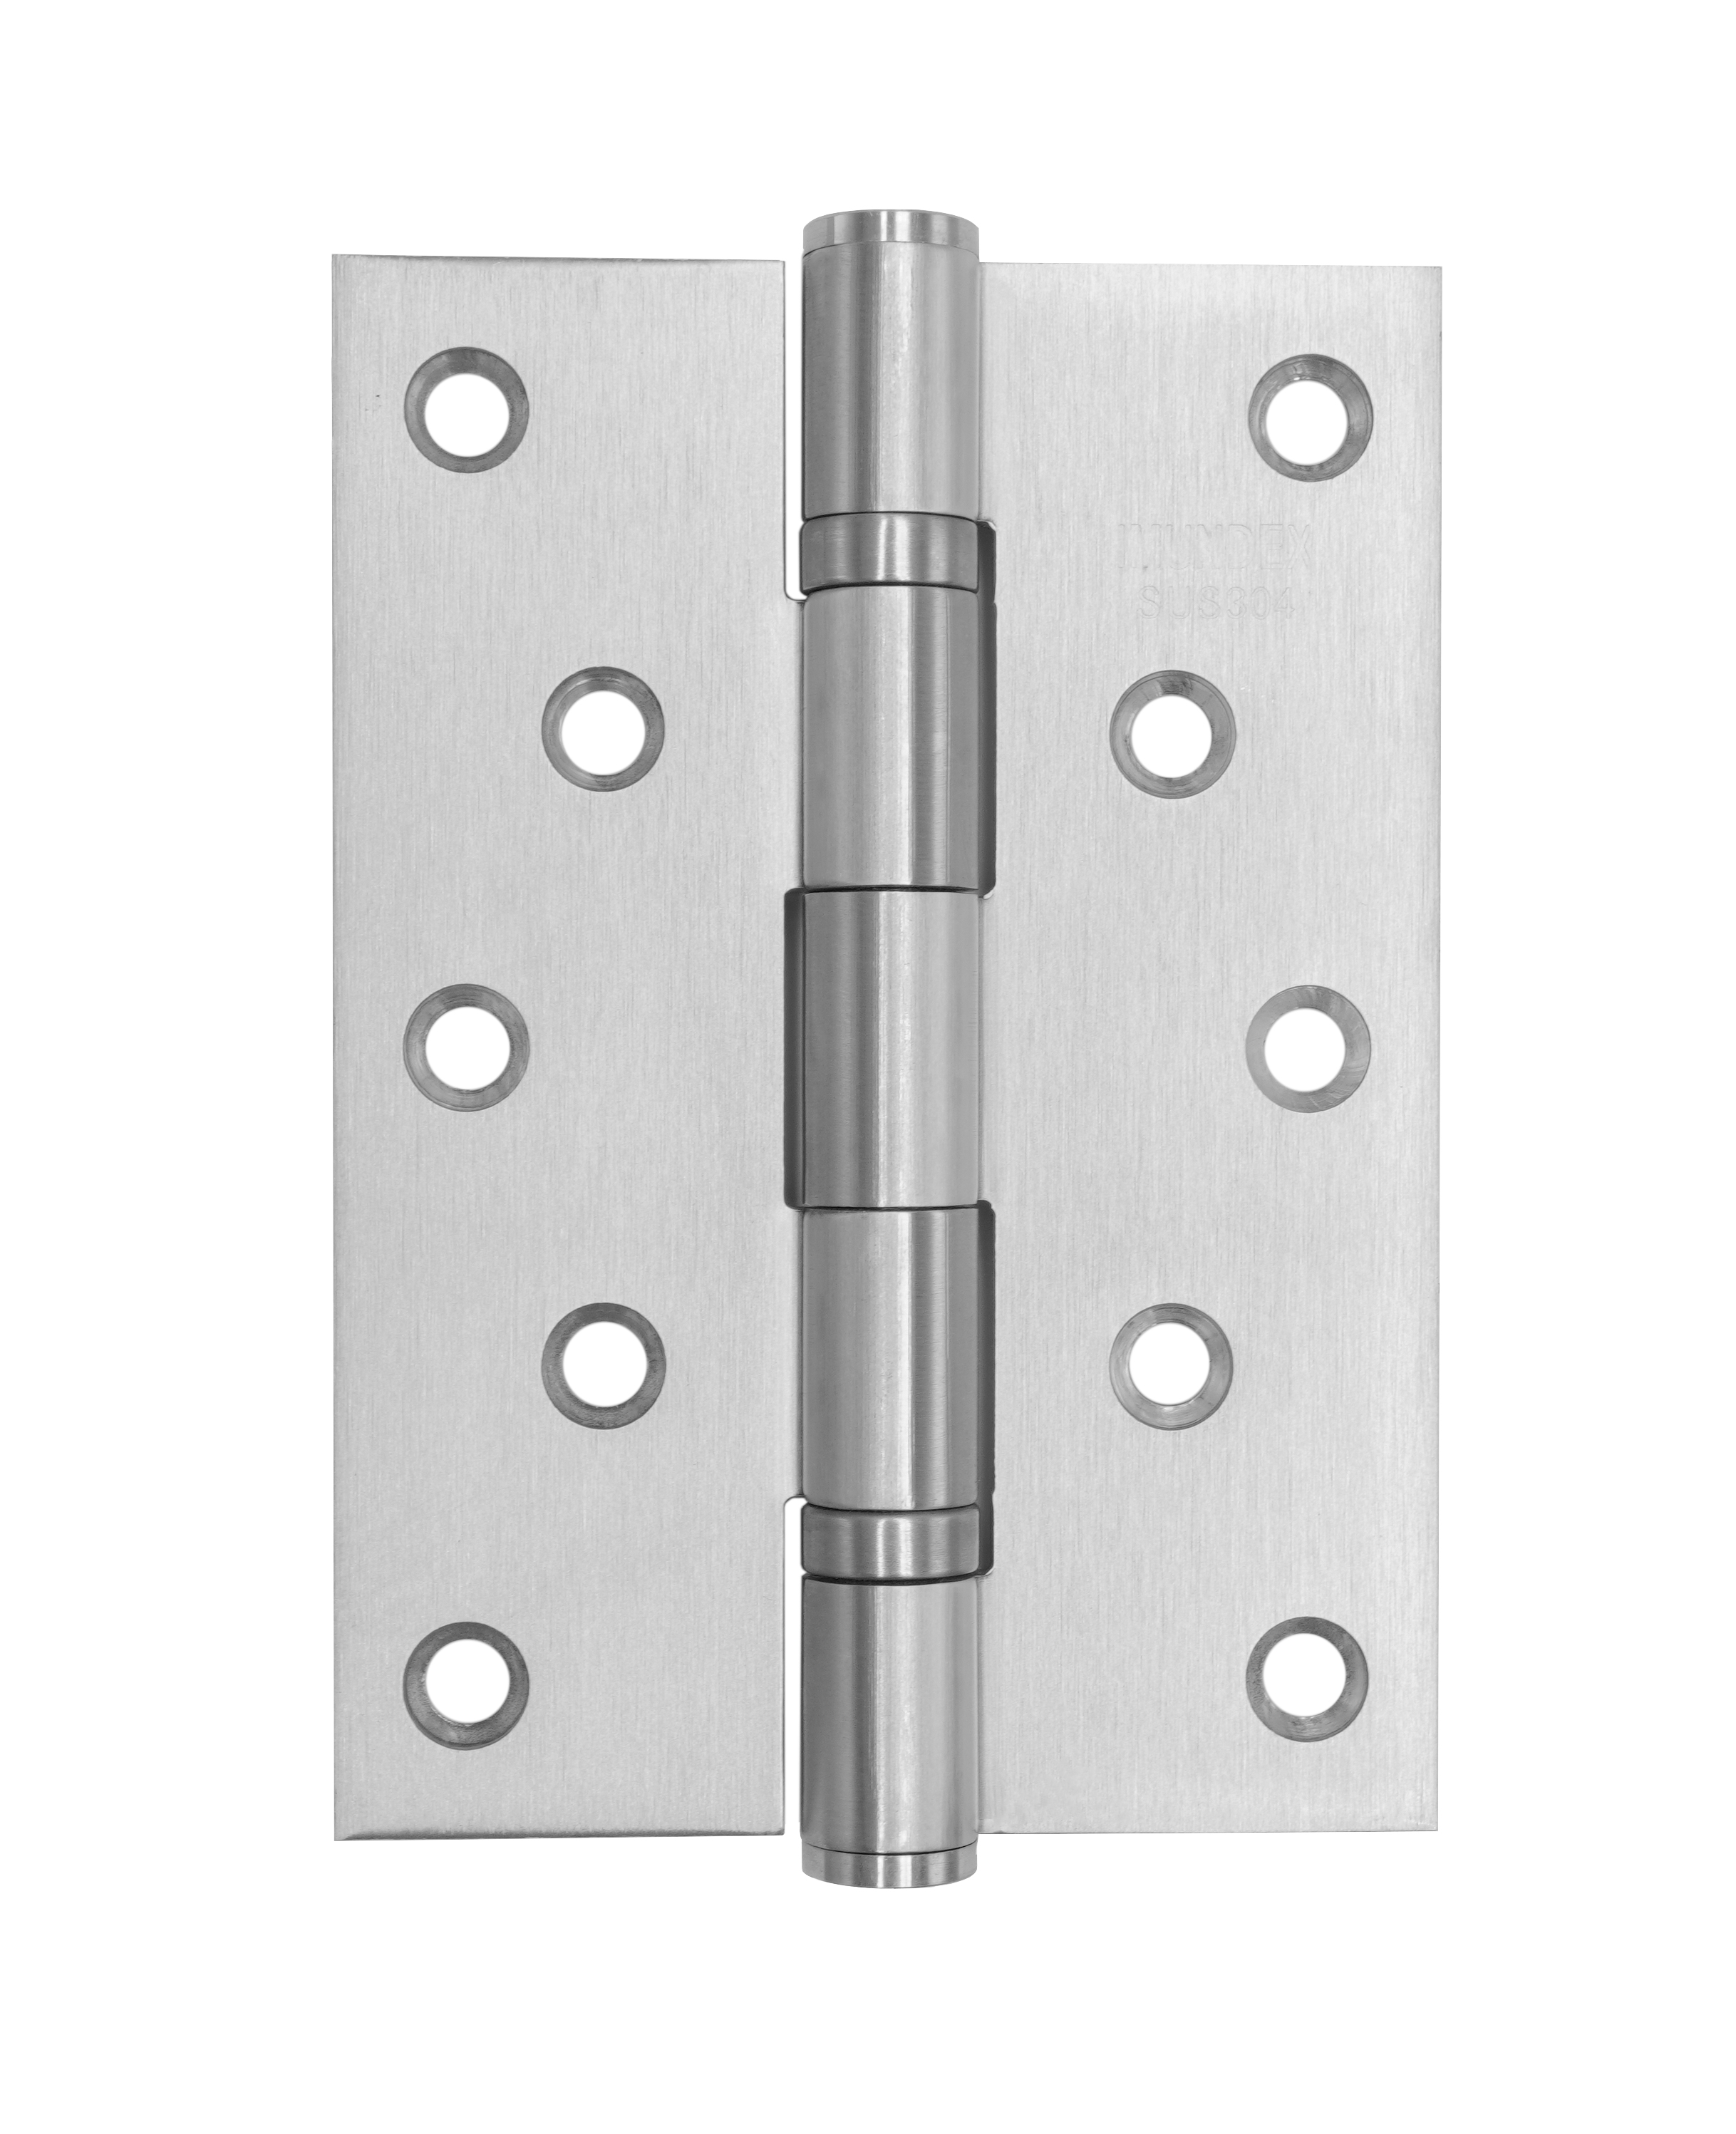 Ball bearing hinges with large size - 2BB - Inox 304